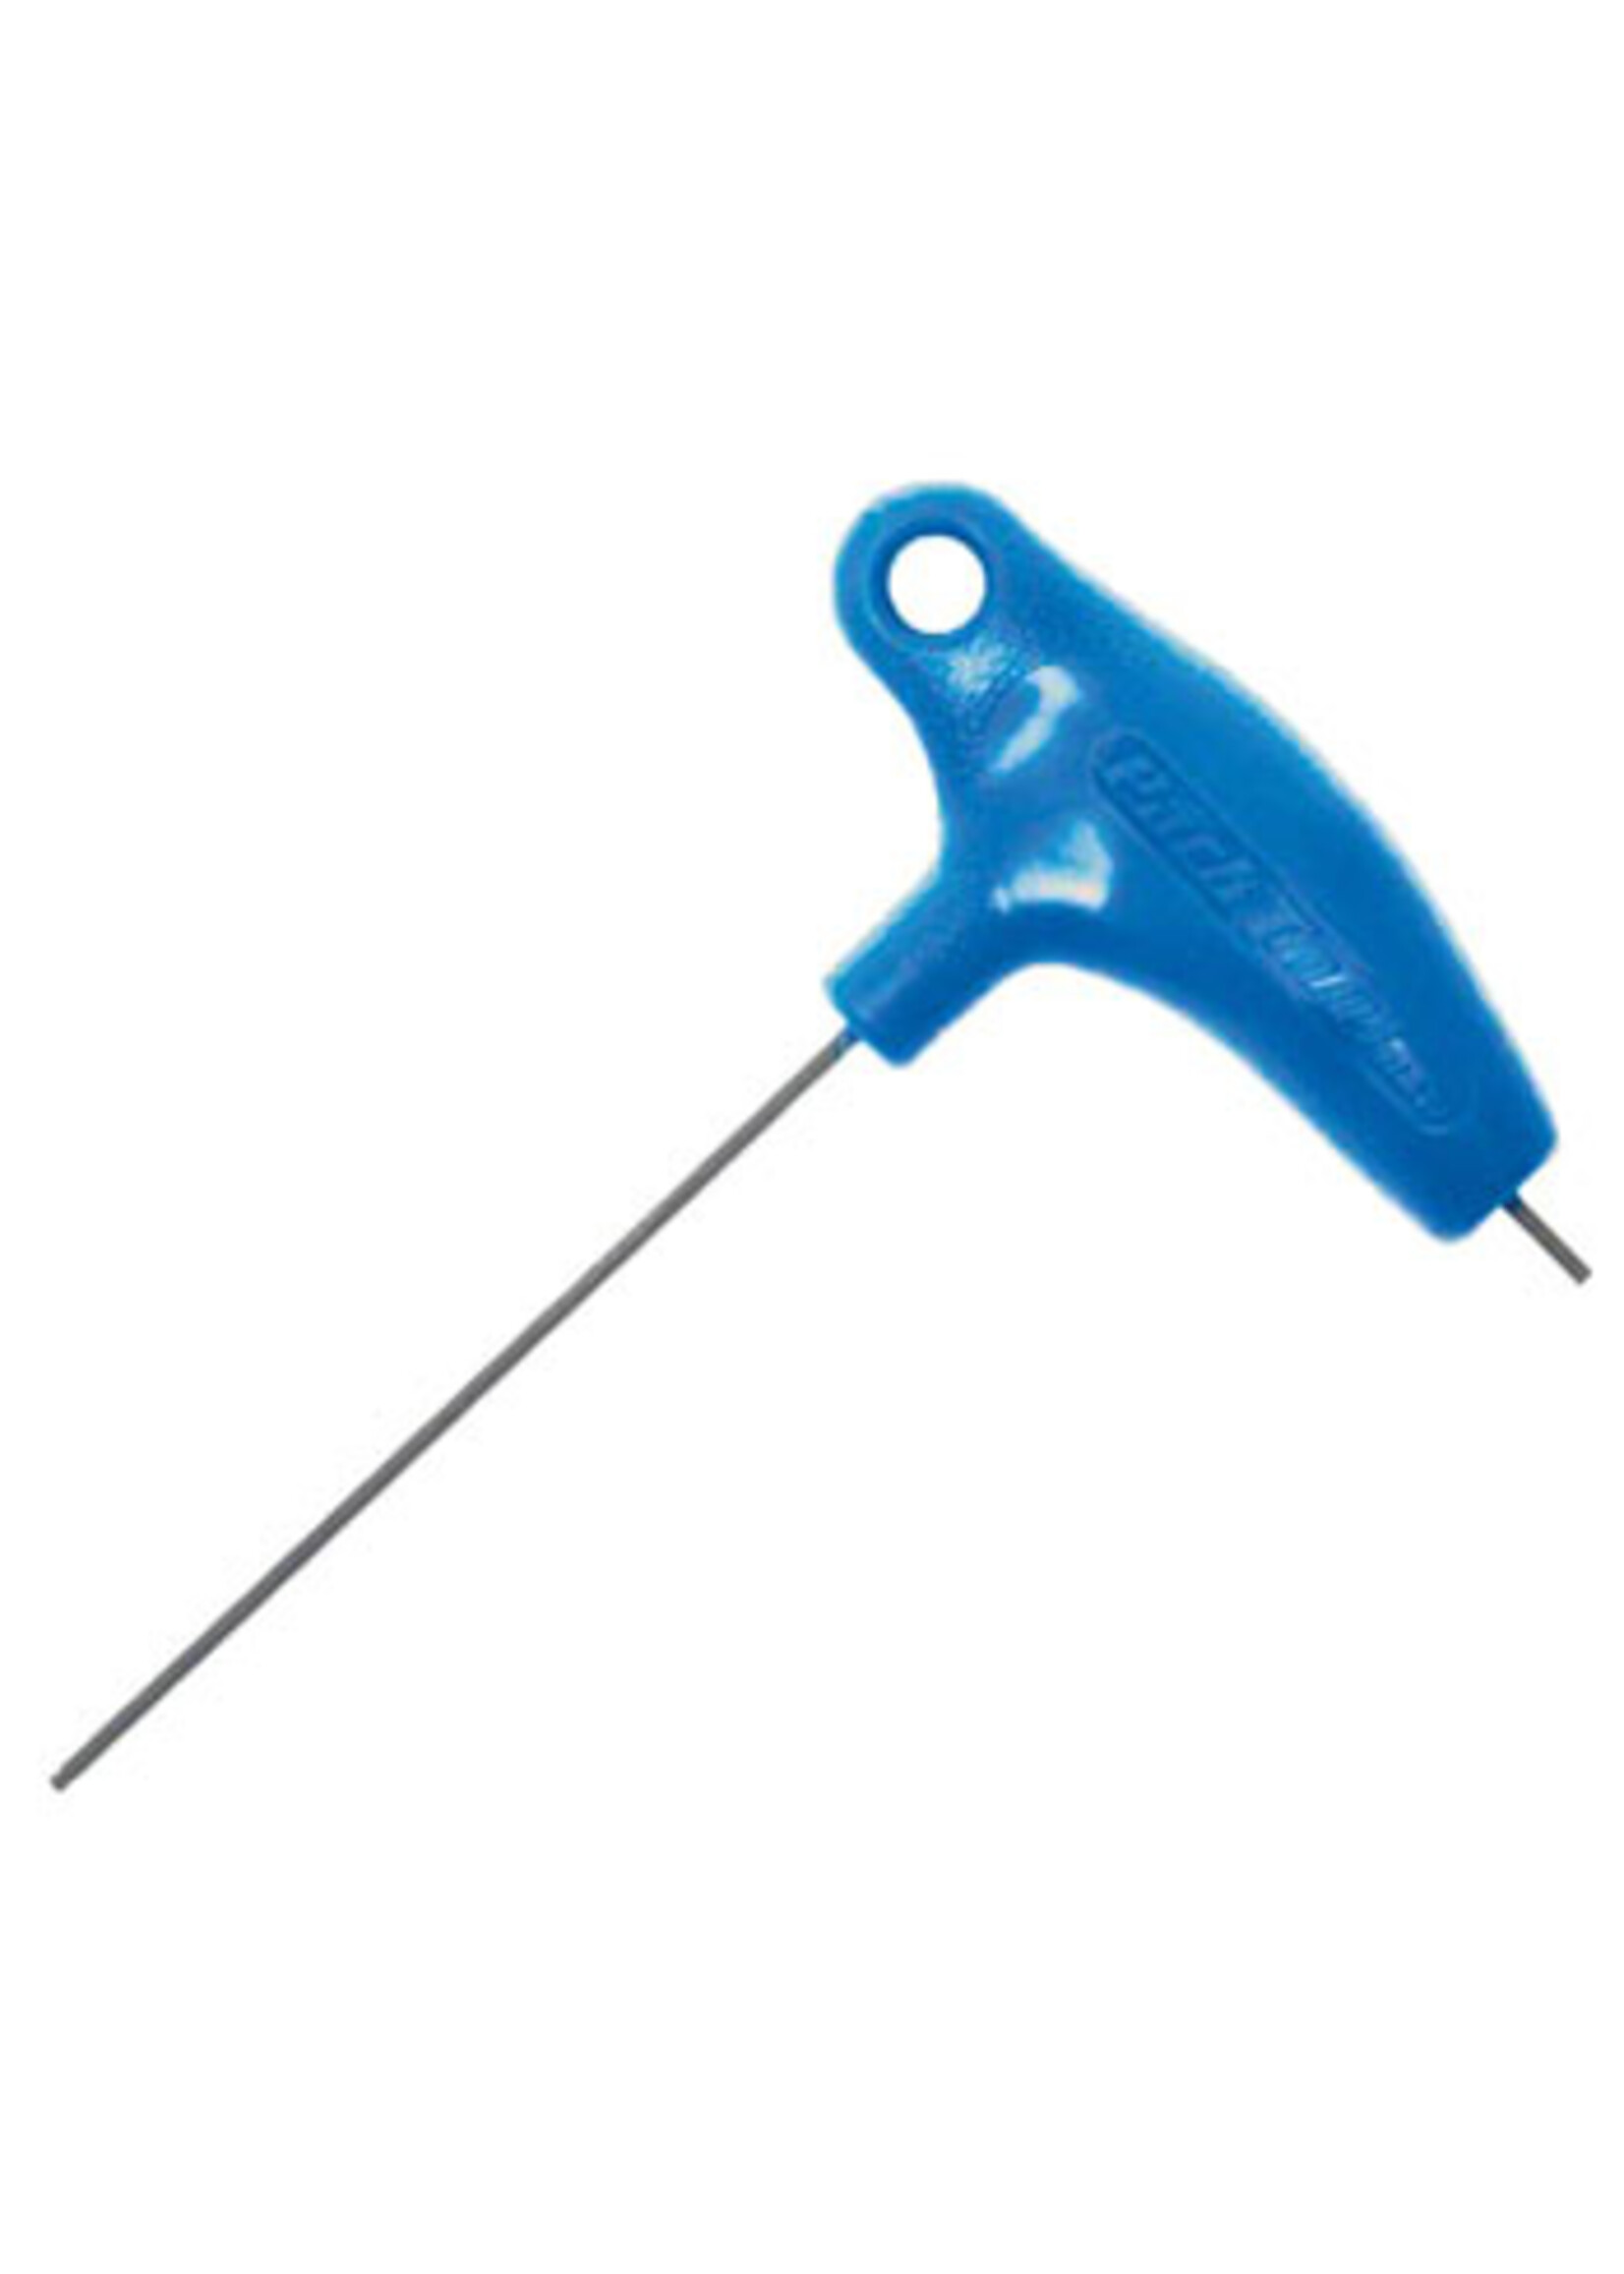 Park Tool Park Tl, PH-2, P-Handled hex wrench, 2mm